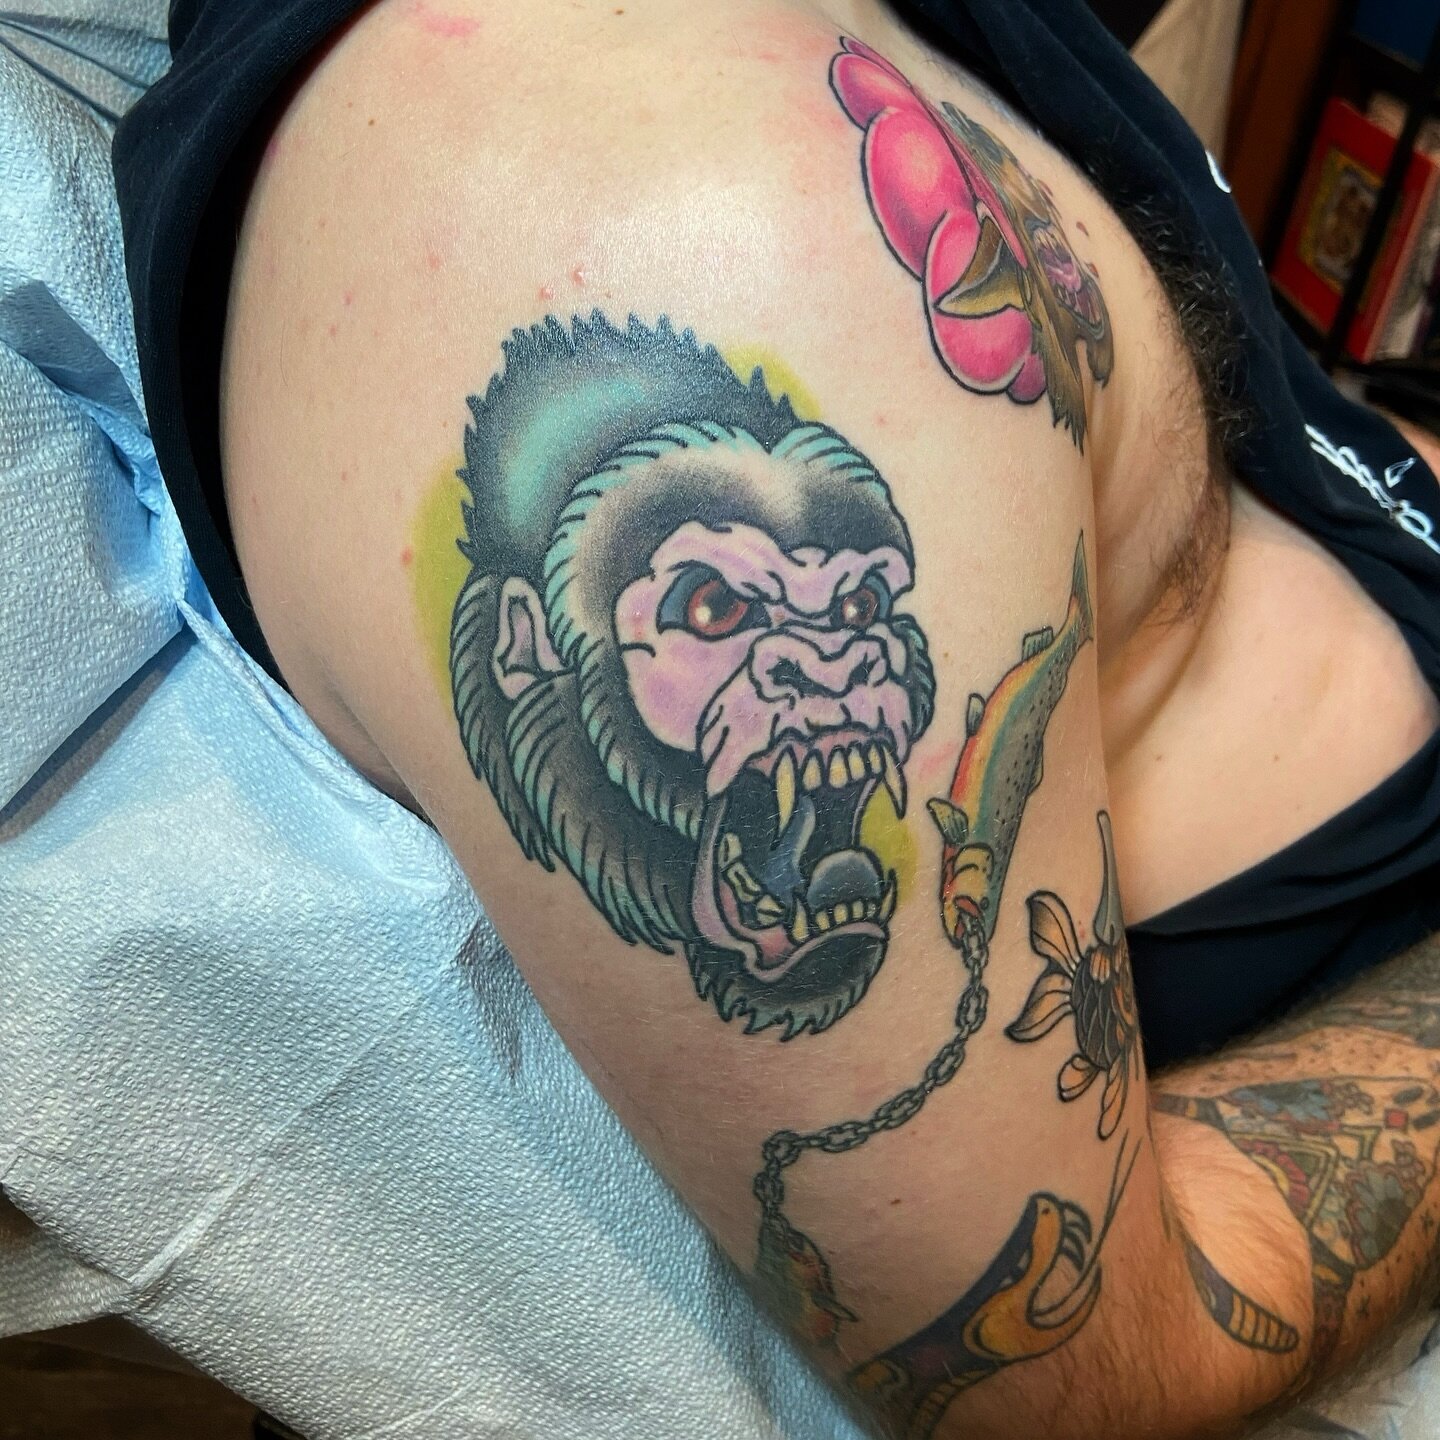 Healed and sealed gorilla from my flash done at the Asbury convention. 🦍
-
-
-
-
-
-
-
#neotraditional #traditionalish #gorilla #asburytattoofest2022 #doctattoos #shorelinetattoo #shoreline #shorelinetattooandpiercing #tuckerton #lbi #jerseyshore